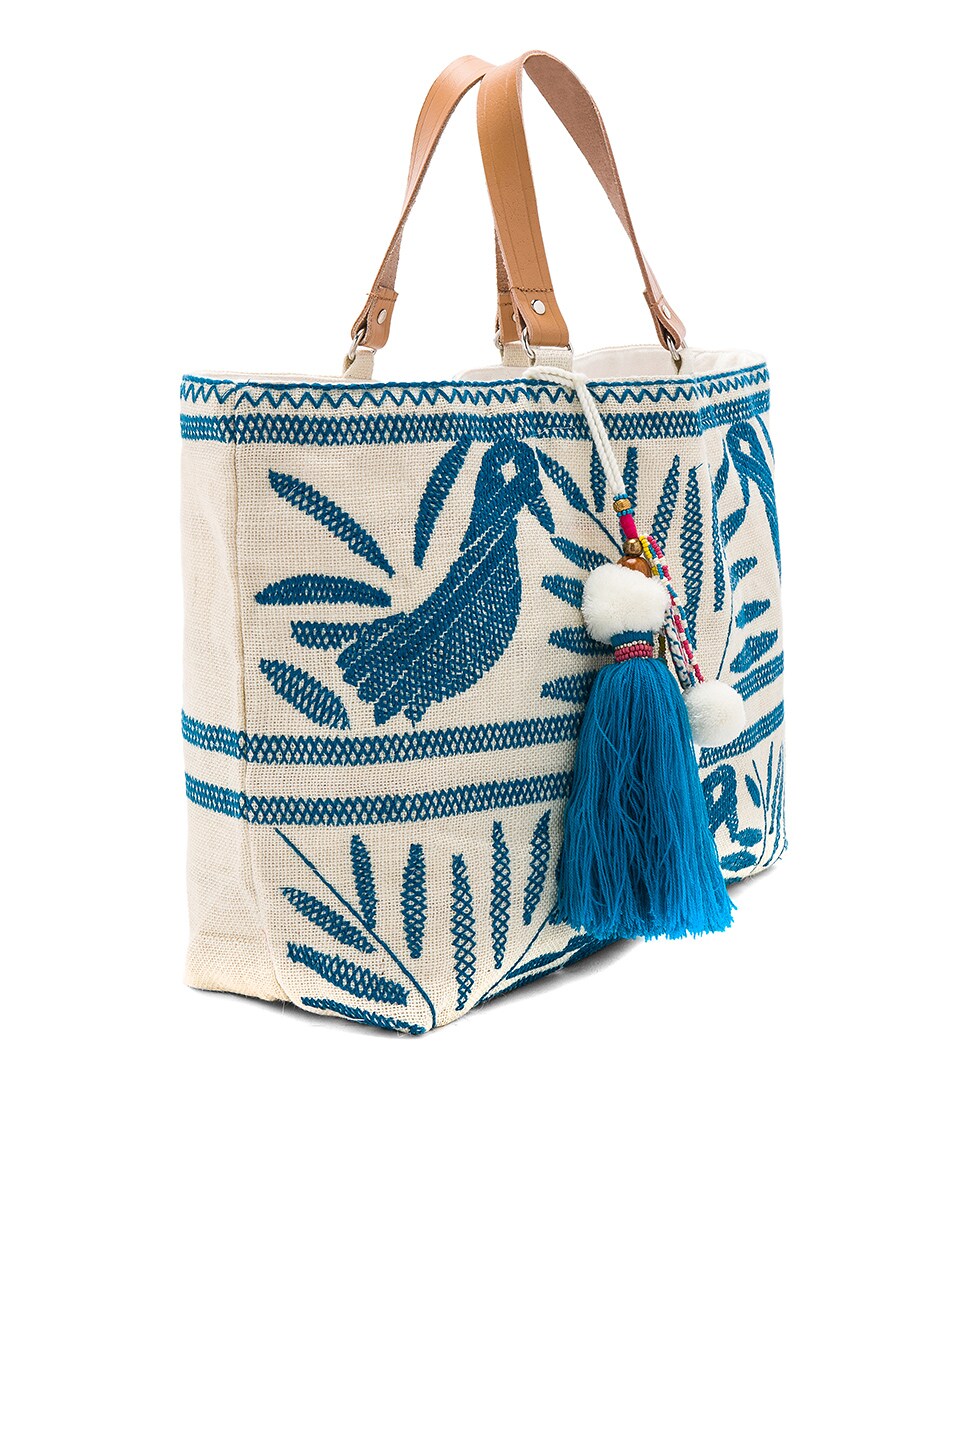 Star Mela Isi Embroidered Tote Bag in Ivory & Blue | REVOLVE